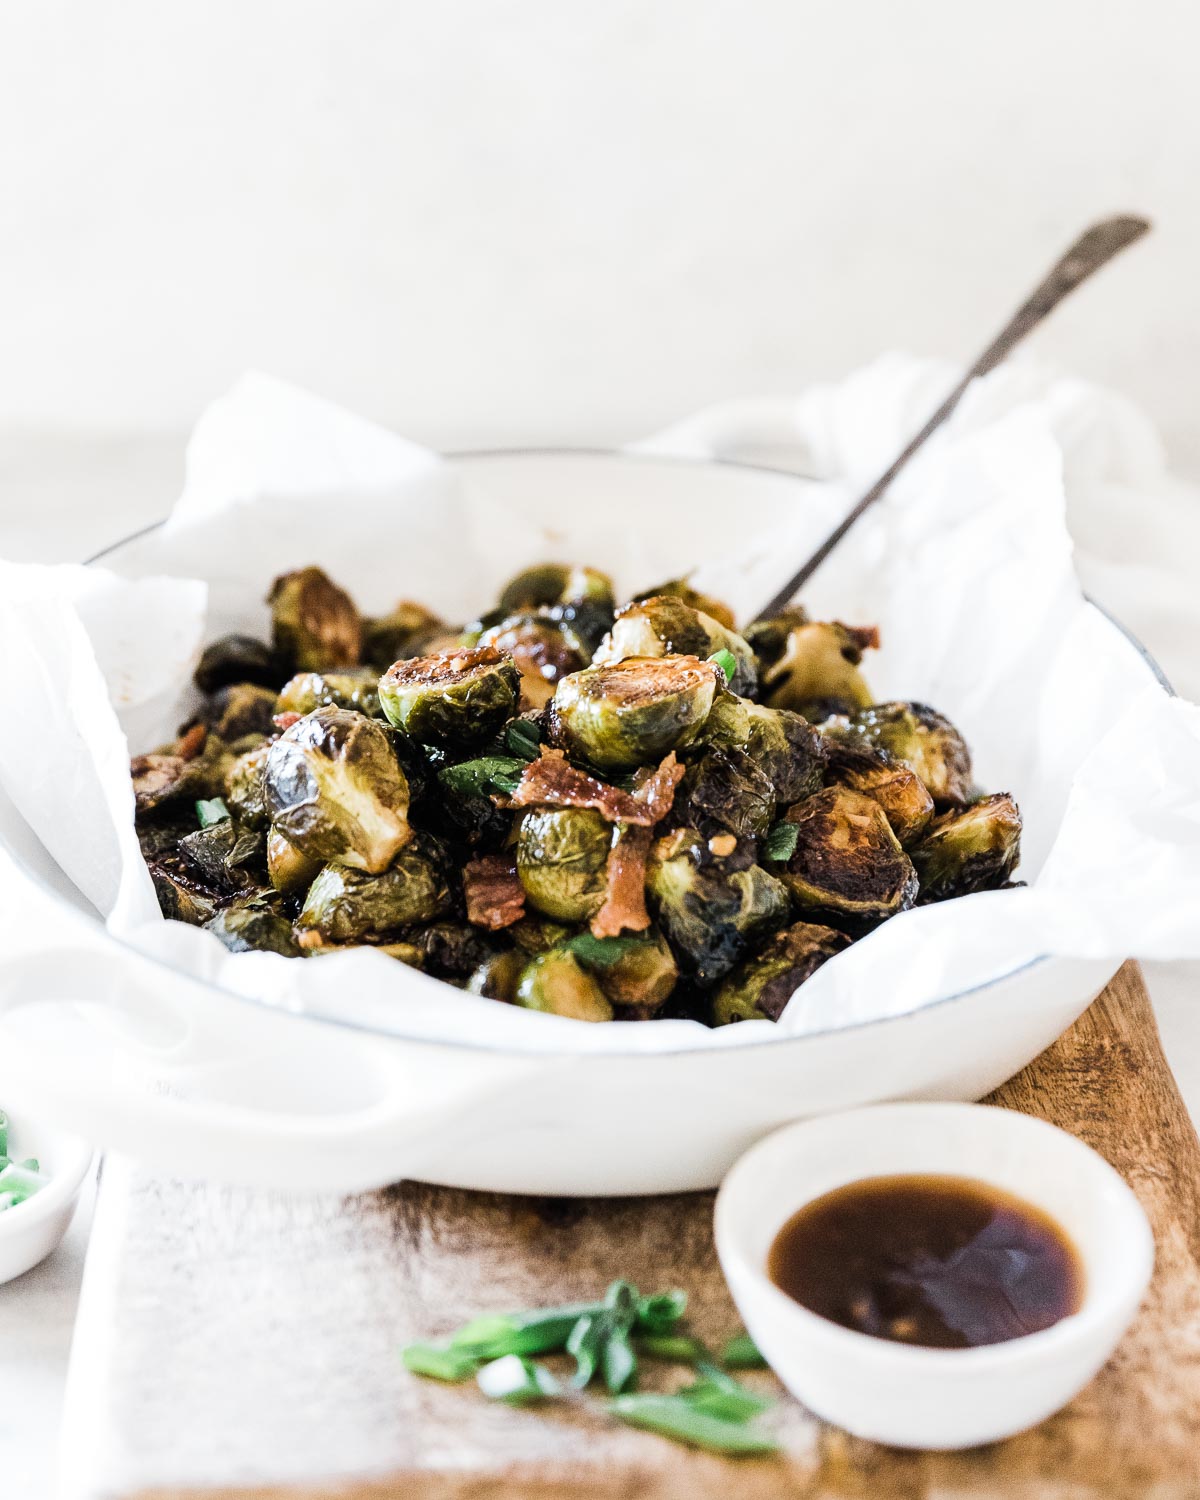 A ¾ view of roasted Brussels sprouts in a white braiser. There is a bowl of teriyaki to the side.